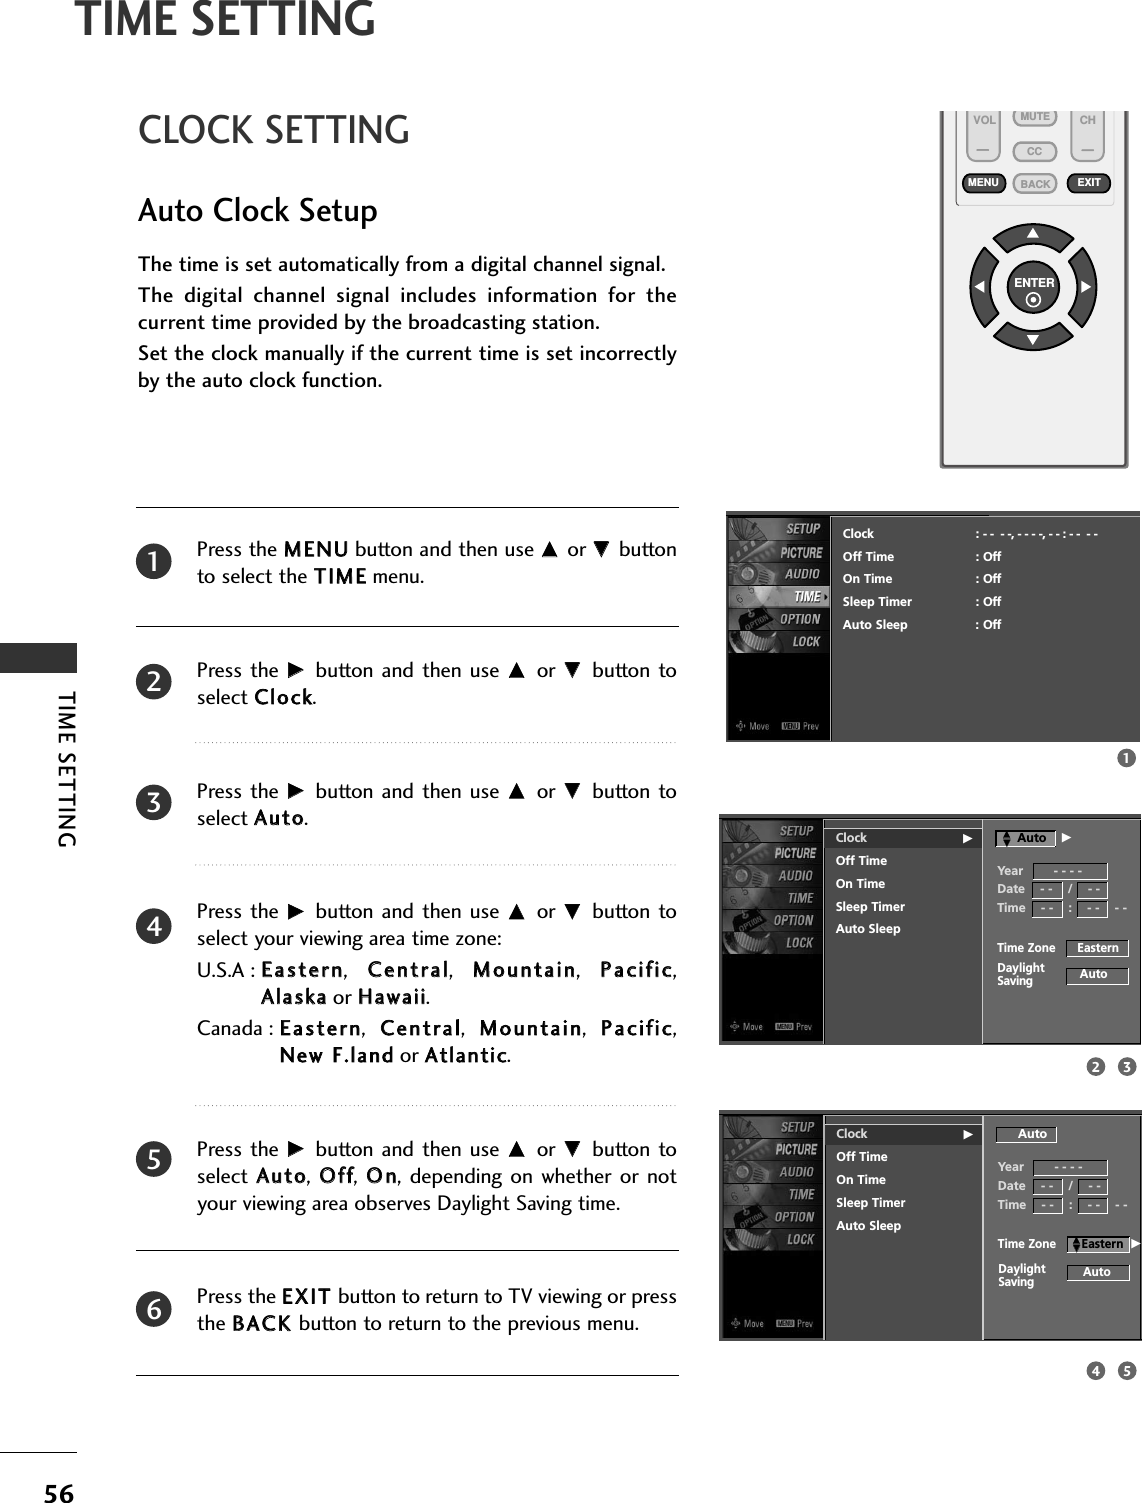 TIME SETTING56TIME SETTINGVOL CHENTERBACKMUTECCMENU EXITCLOCK SETTINGAuto Clock SetupThe time is set automatically from a digital channel signal.  The  digital  channel  signal  includes  information  for  thecurrent time provided by the broadcasting station.Set the clock manually if the current time is set incorrectlyby the auto clock function.Press the MMEENNUUbutton and then use DD or EE buttonto select the TTIIMMEEmenu.Press the  GG button and  then use DD or EE button toselect CClloocckk. Press the  GG button and  then use DD or EE button toselect AAuuttoo.Press the  GG button and  then use DD or EE button toselect your viewing area time zone: U.S.A : EEaasstteerrnn,  CCeennttrraall,  MMoouunnttaaiinn,  PPaacciiffiicc,AAllaasskkaaor HHaawwaaiiii.Canada : EEaasstteerrnn,  CCeennttrraall,  MMoouunnttaaiinn,  PPaacciiffiicc,NNeeww FF..llaannddor AAttllaannttiicc.Press the  GG button and  then use DD or EE button toselect  AAuuttoo,  OOffff,  OOnn, depending  on whether or  notyour viewing area observes Daylight Saving time.Press the EEXXIITT button to return to TV viewing or pressthe BBAACCKKbutton to return to the previous menu.23456113254Clock GOff TimeOn TimeSleep TimerAuto SleepTime Zone      EasternAutoDaylightSavingClock : - -  - -, - - - -, - - : - -  - -Off Time : OffOn Time : OffSleep Timer : OffAuto Sleep : OffYear        - - - -Date    - -    /    - -Time    - -    :    - -    - -AutoClock GOff TimeOn TimeSleep TimerAuto SleepAutoYear        - - - -Date    - -    /    - -Time    - -    :    - -    - -AutoTime Zone       EasternDaylightSavingDDEEGDDEEG